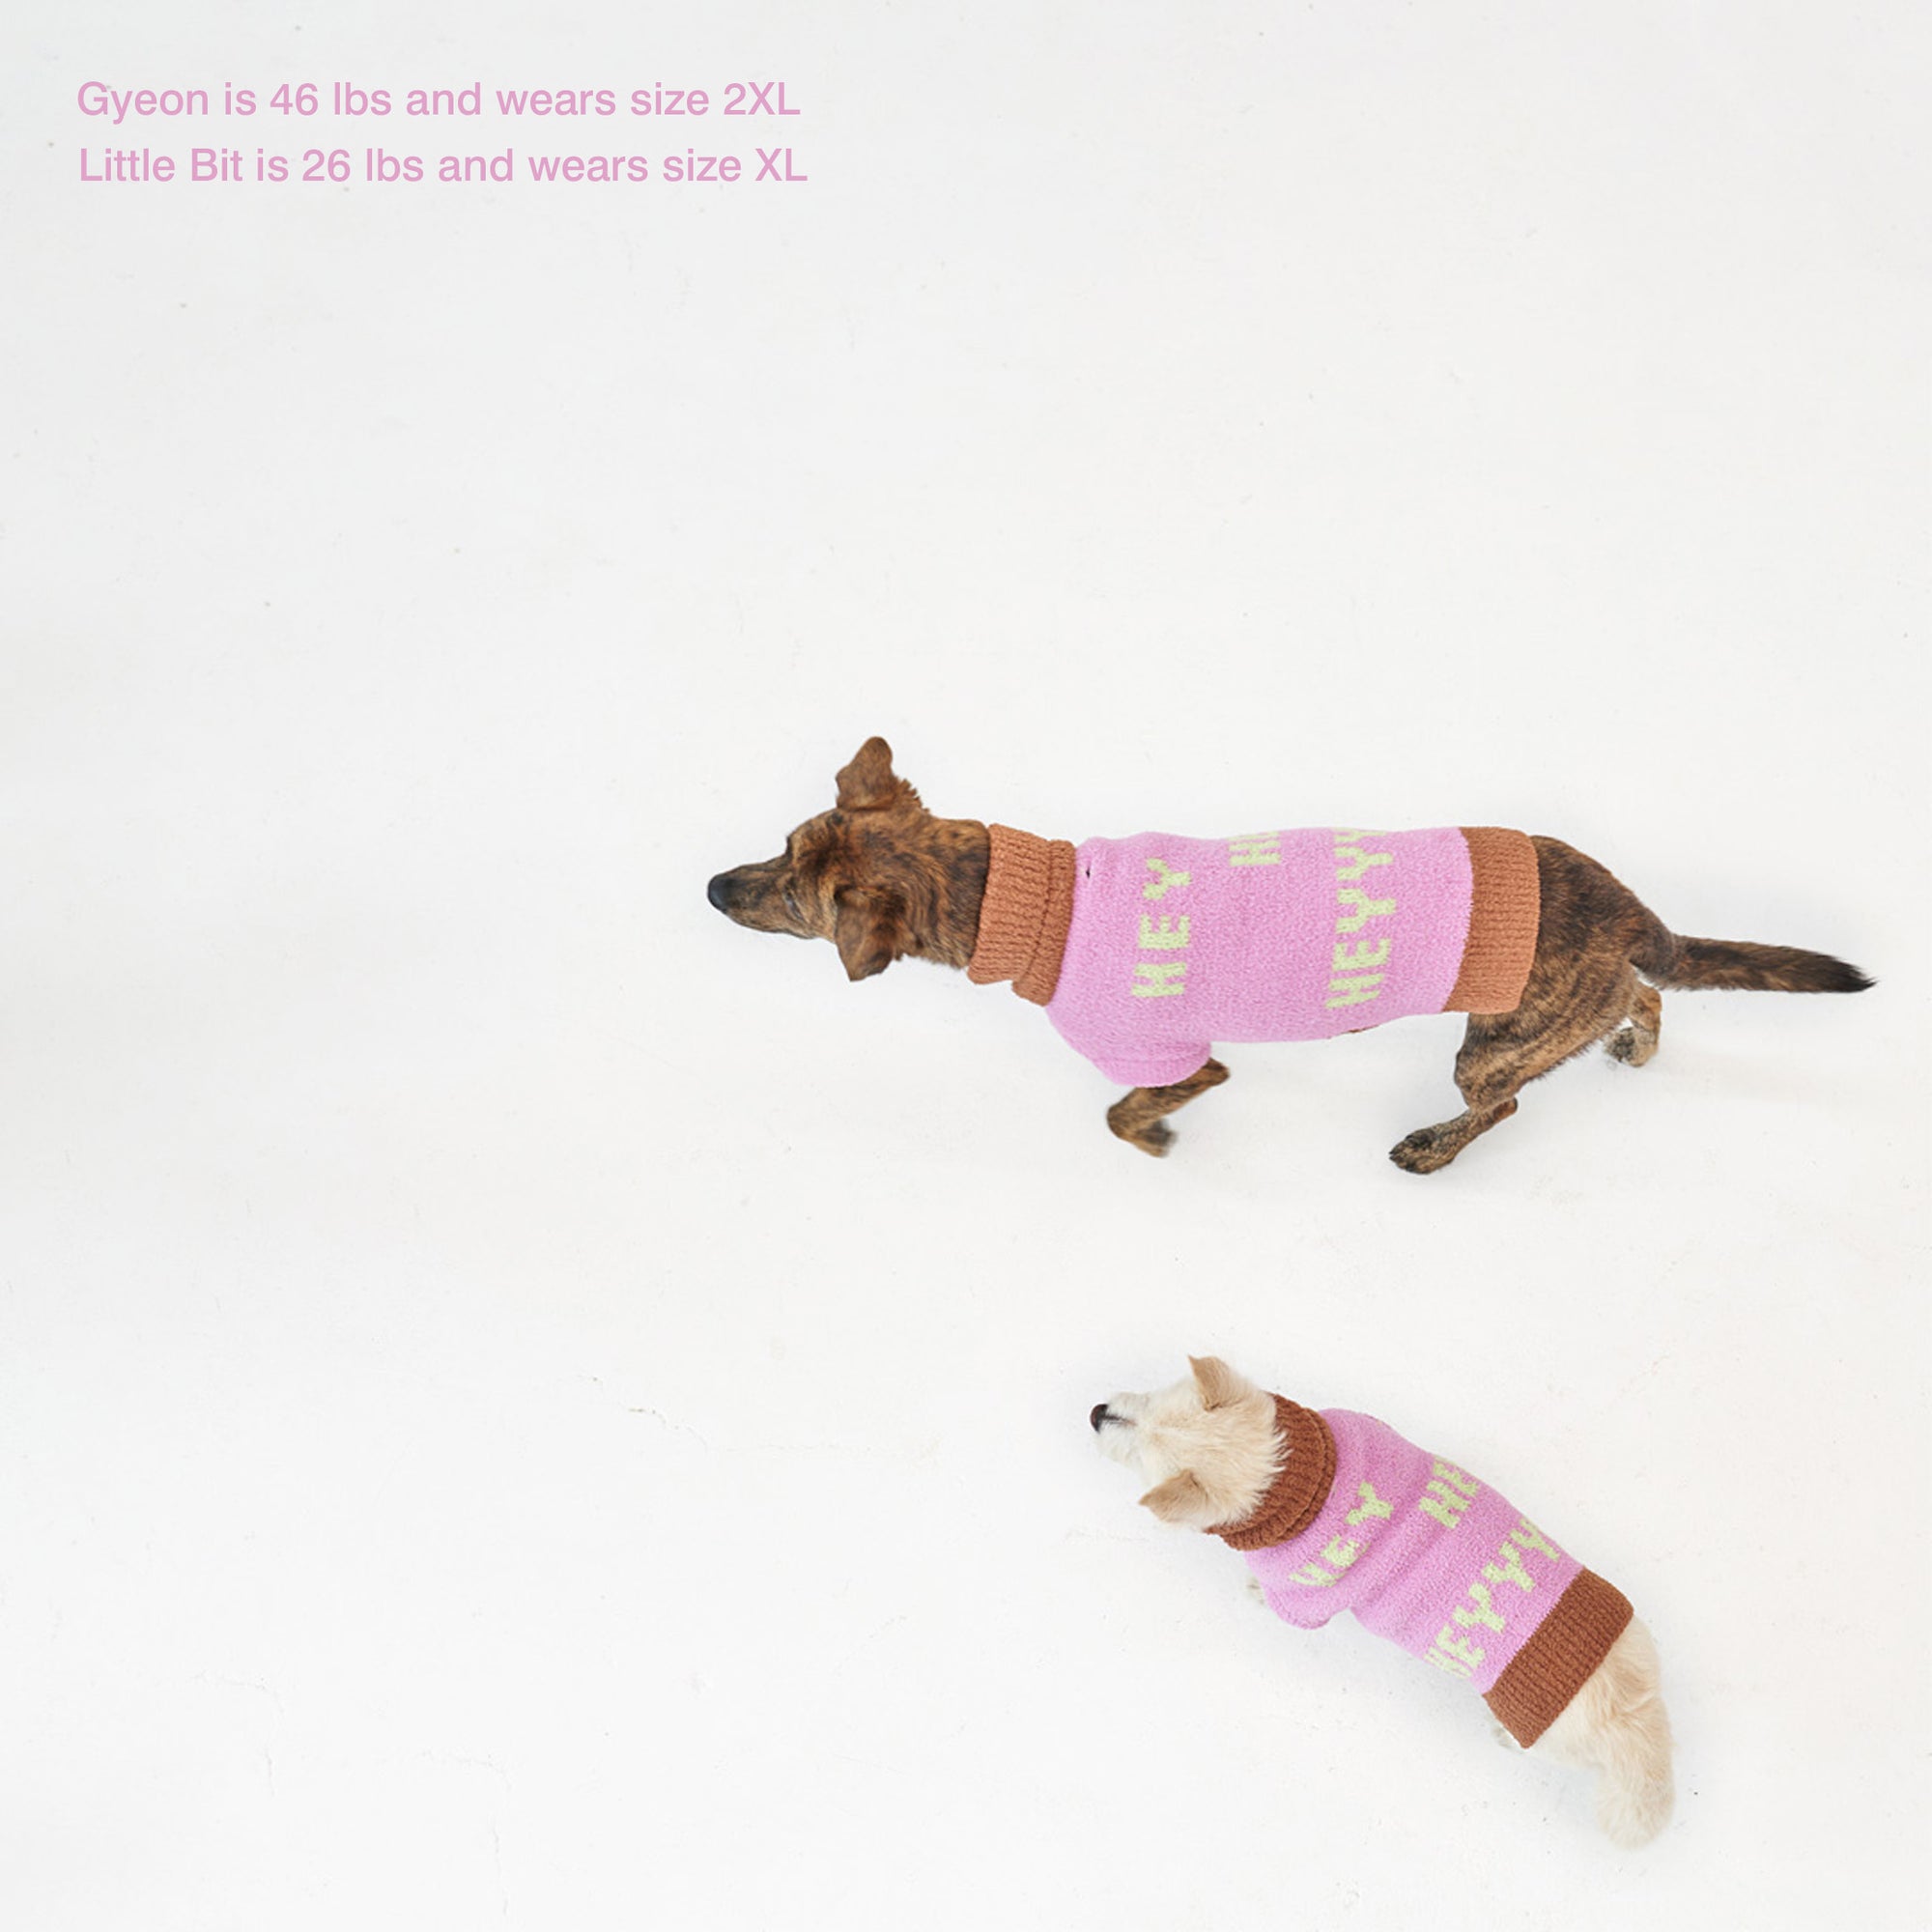 ogs Gyeon, 46Lbs, and Little Bit, 26 Lbs, in "The Furryfolks" Hey sweaters, size 2XL and XL, on a white surface.